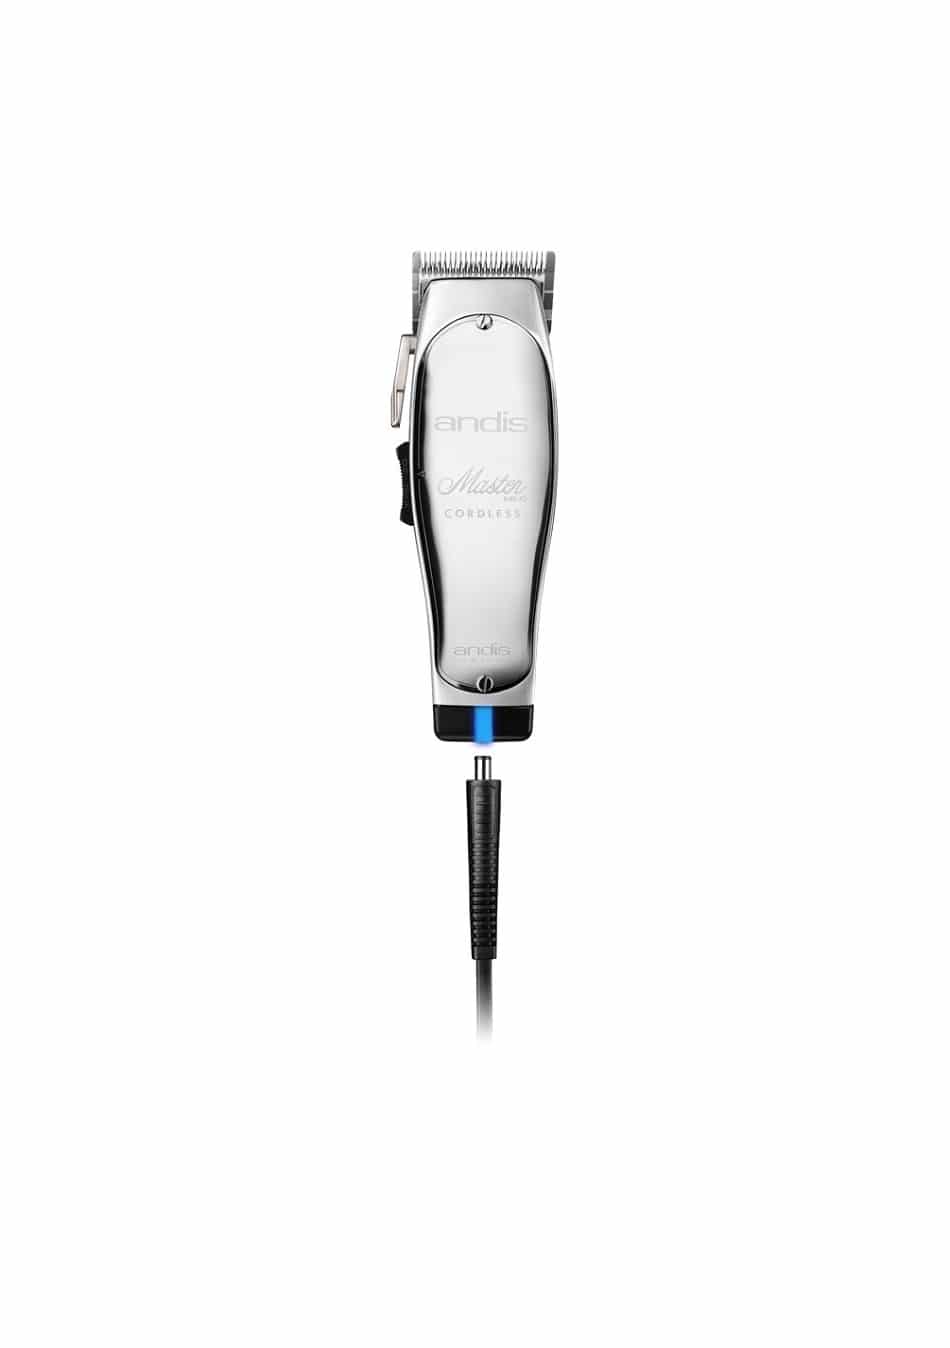 andis professional cordless lithium ion master clipper